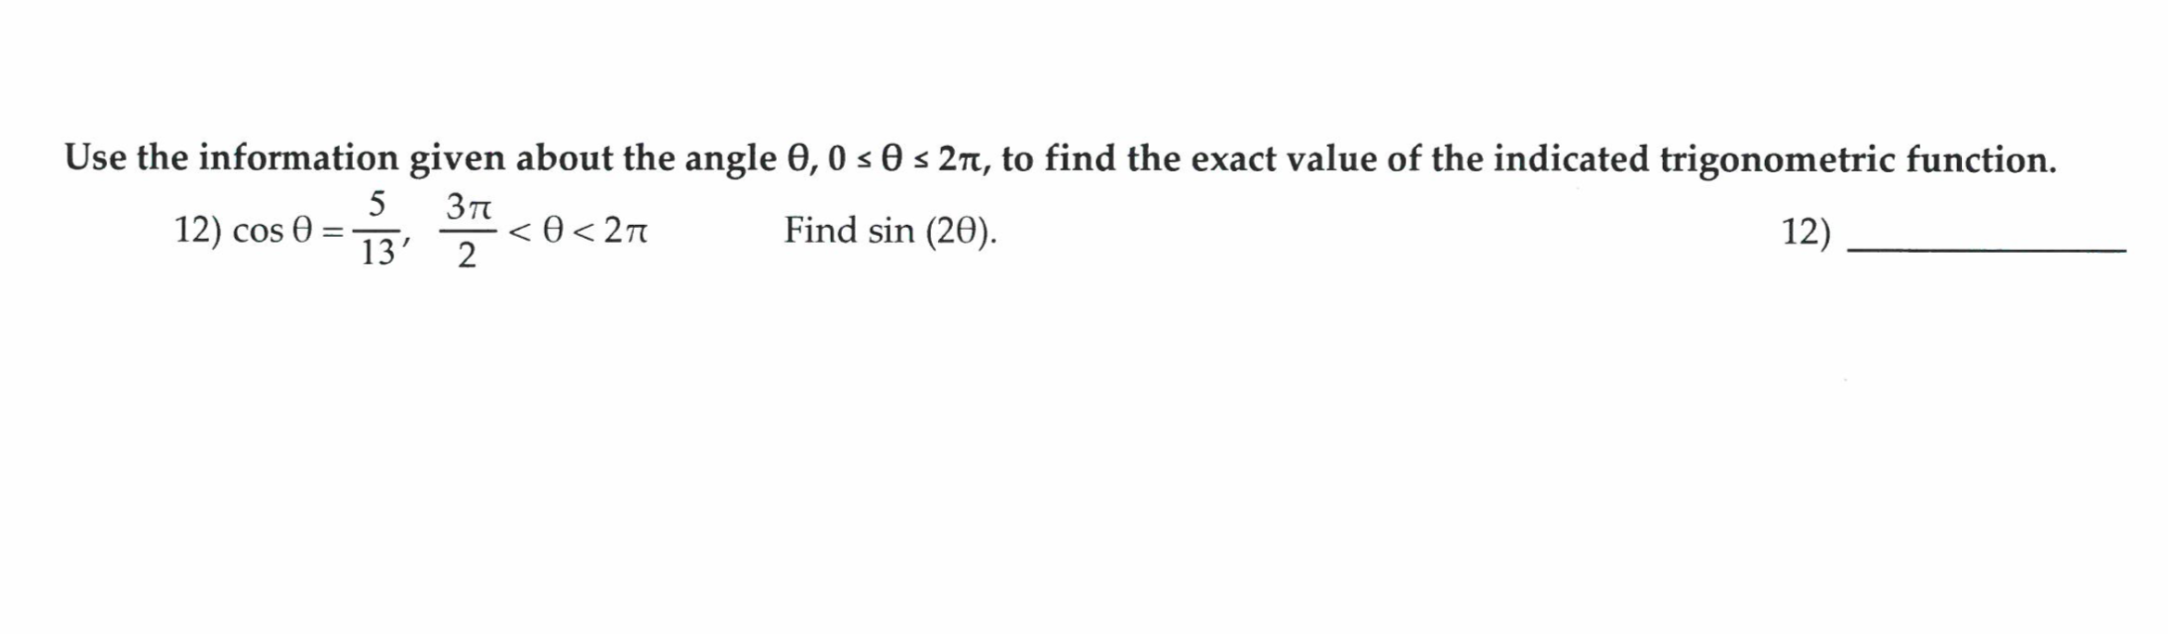 Use the information given about the angle 0, 0 s 0 s 27, to find the exact value of the indicated trigonometric function.
5
Зп
12) cos 0 =
13'
< 0 < 2n
2
Find sin (20).
12)
